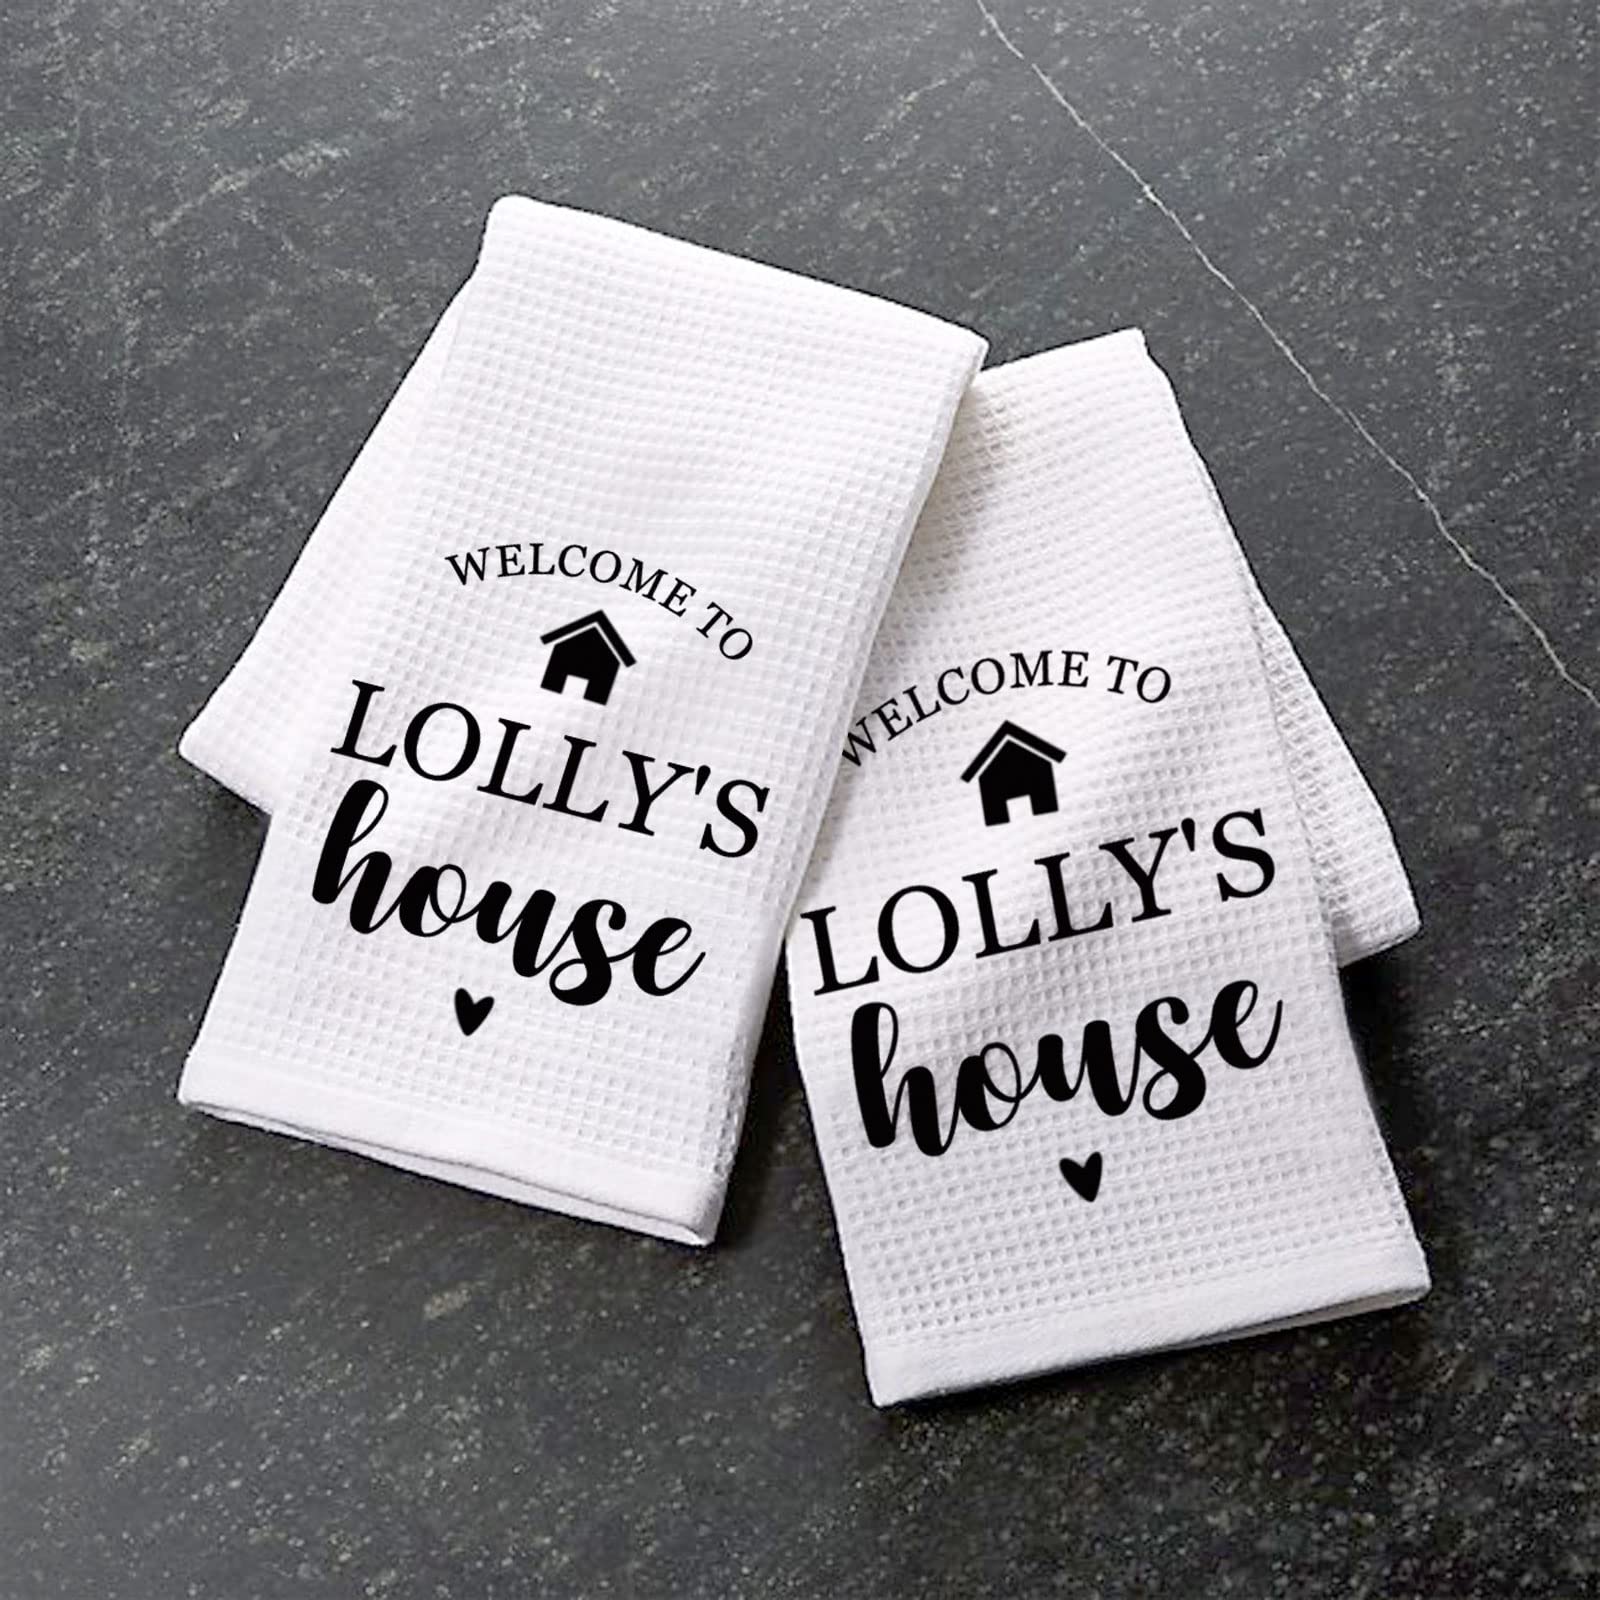 PXTIDY Lolly Grandma Gift Tea Towel Dish Towel Lolly Housewarming Gift First Home Gifts Home Owner Gift (Welcome to LOLLY'S House)